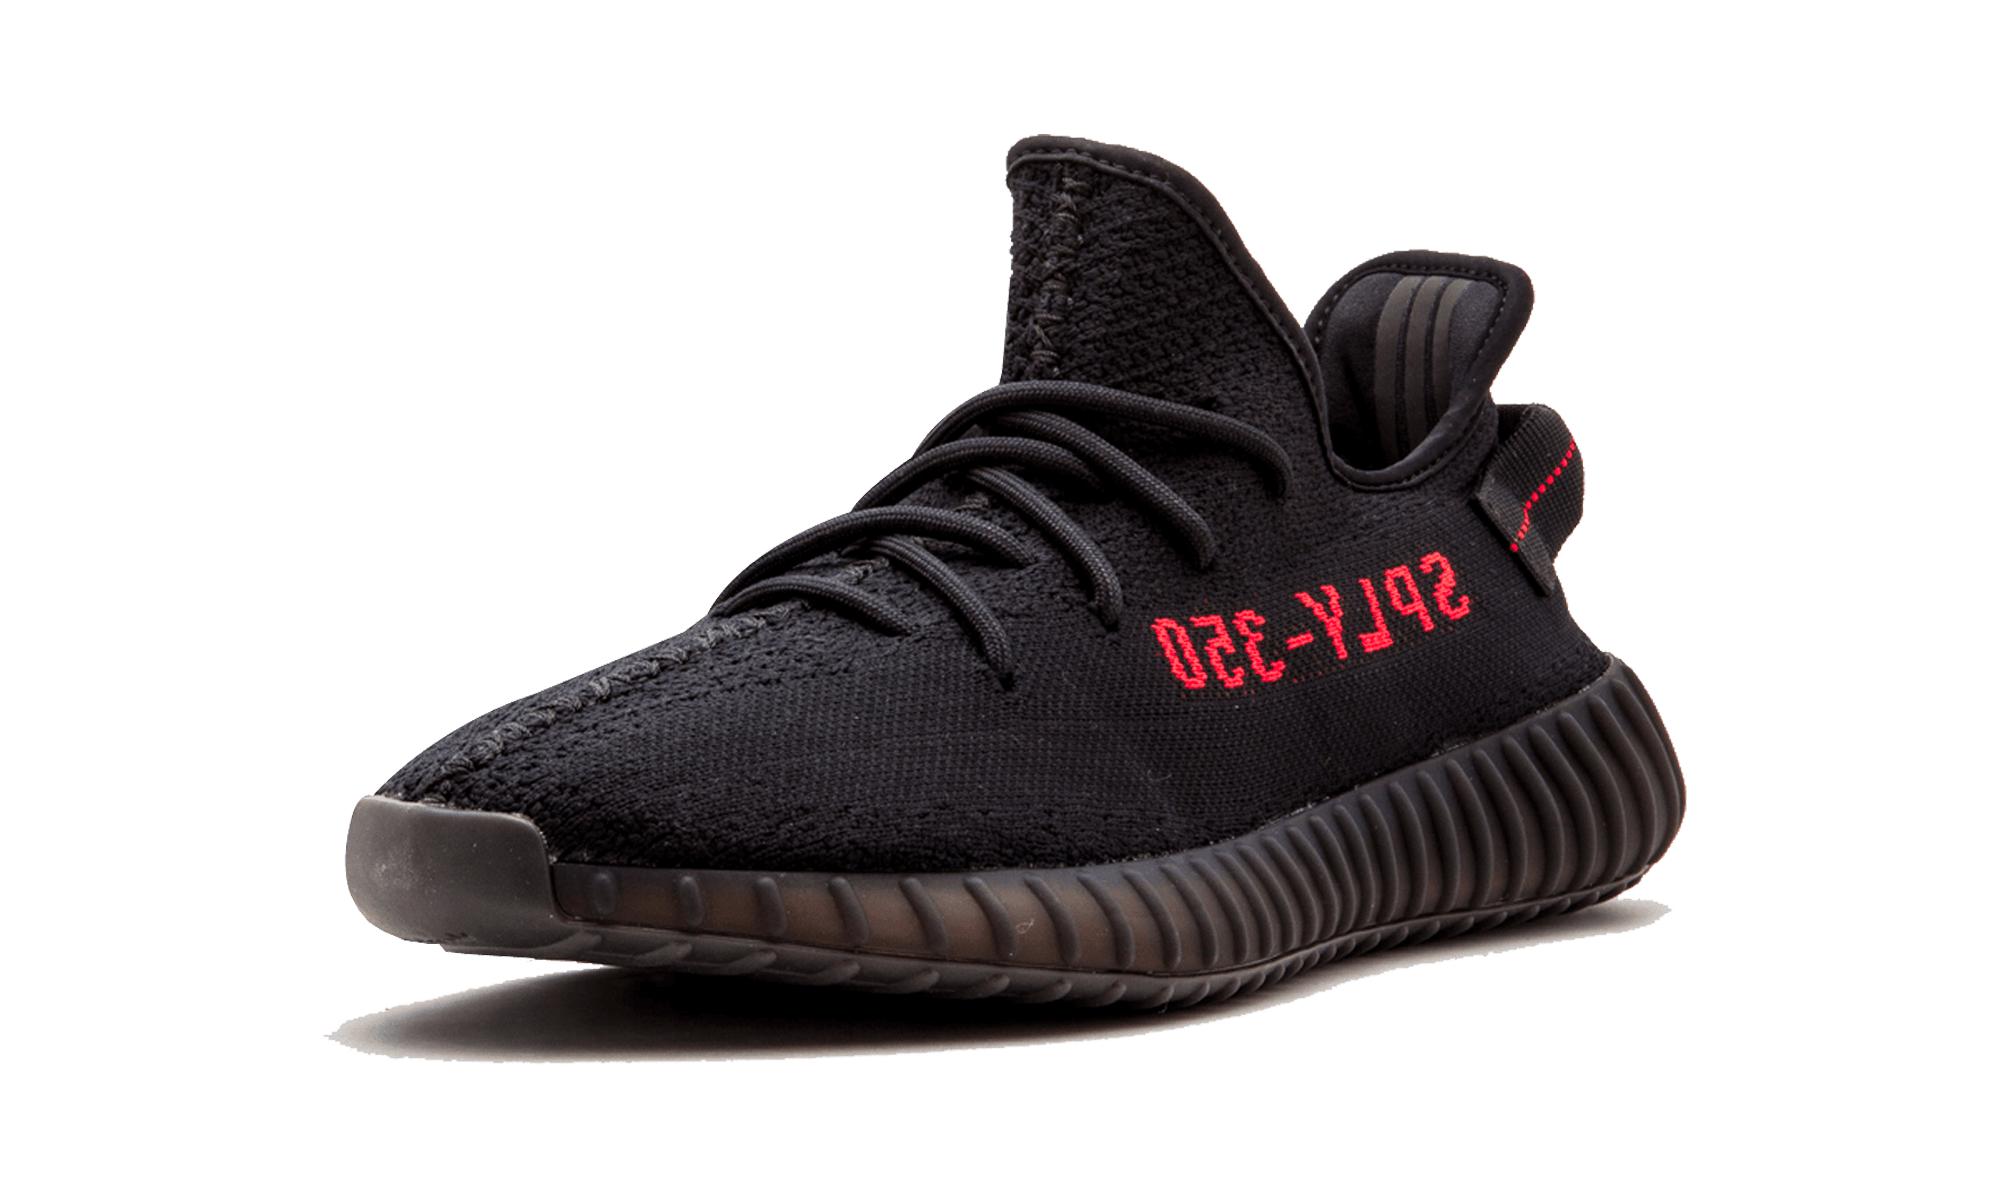 Yeezy Boost 350 Archives - AIO bot